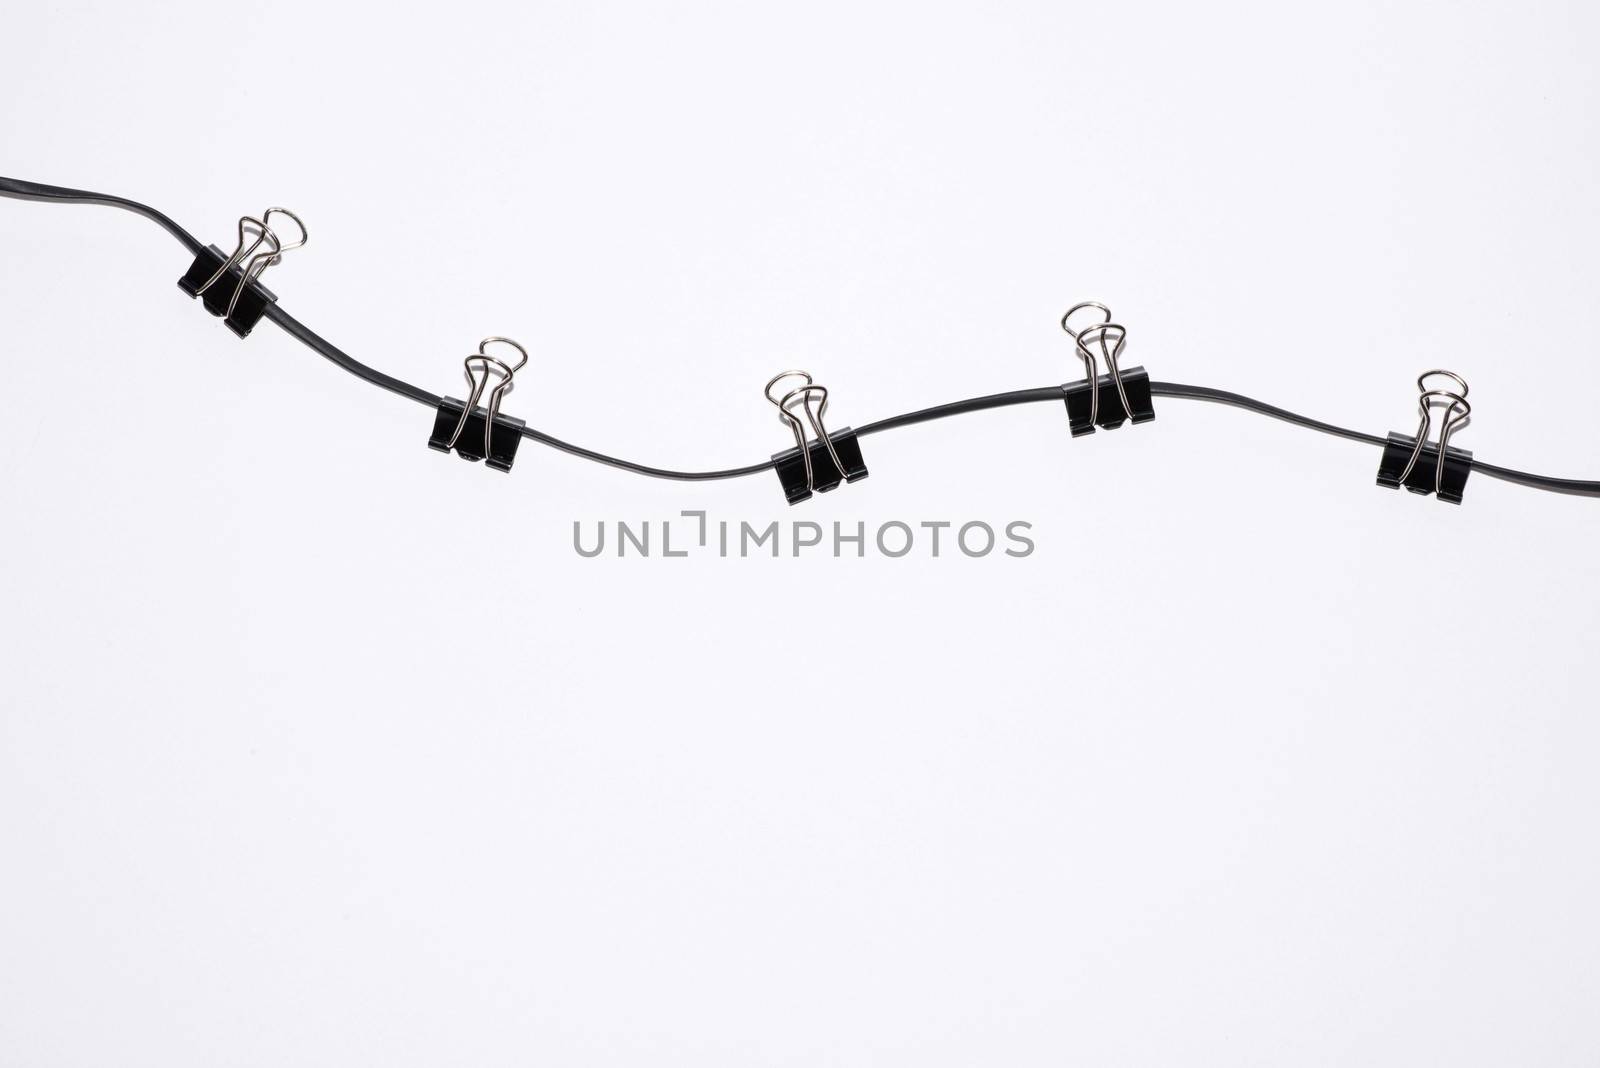 office paper clips on rope isolated on white